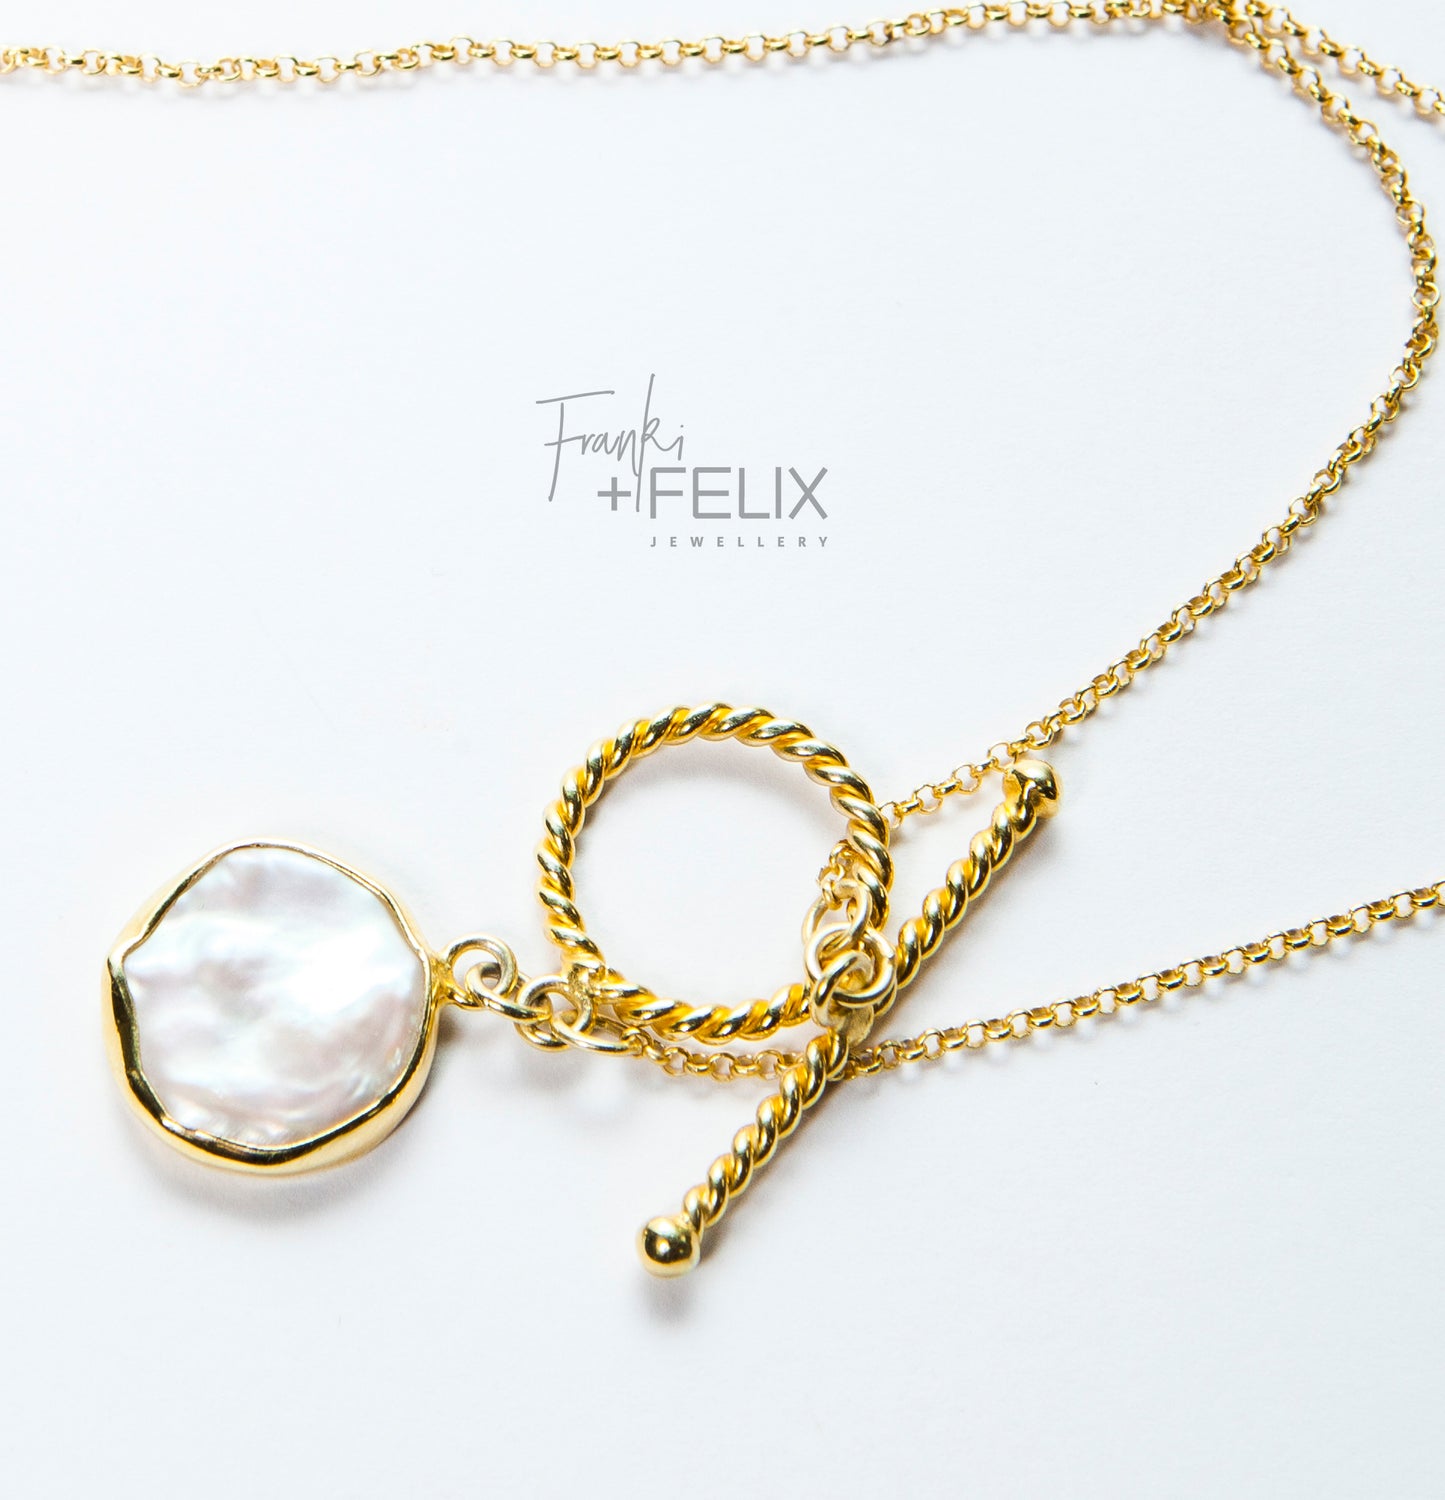 Gold Fob Chain Necklace with Baroque Pearl